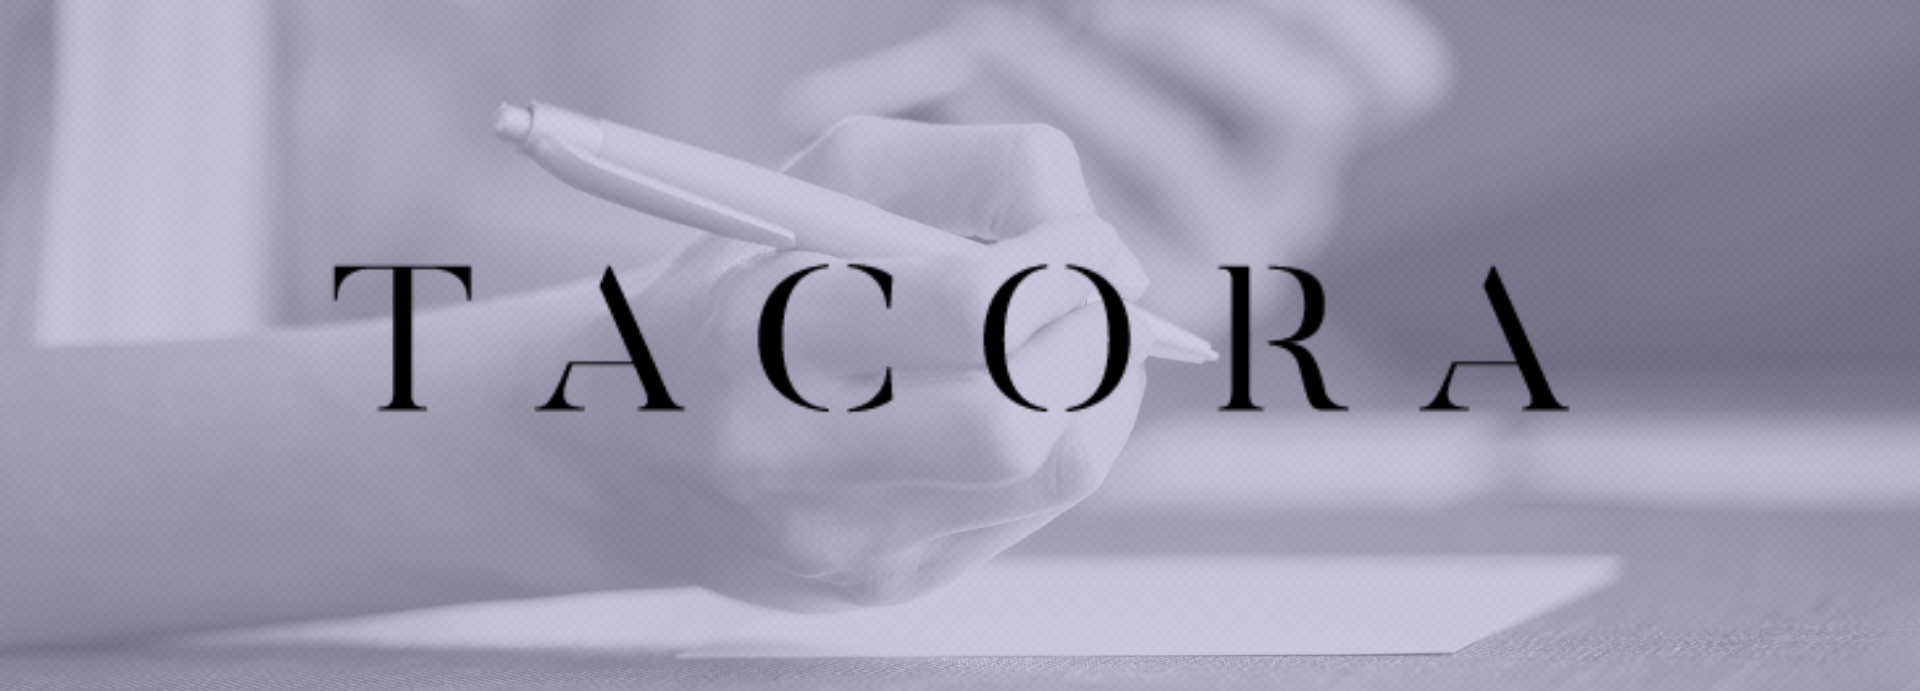 Tacora Lends Differentiation To Specialty Finance & Insurance